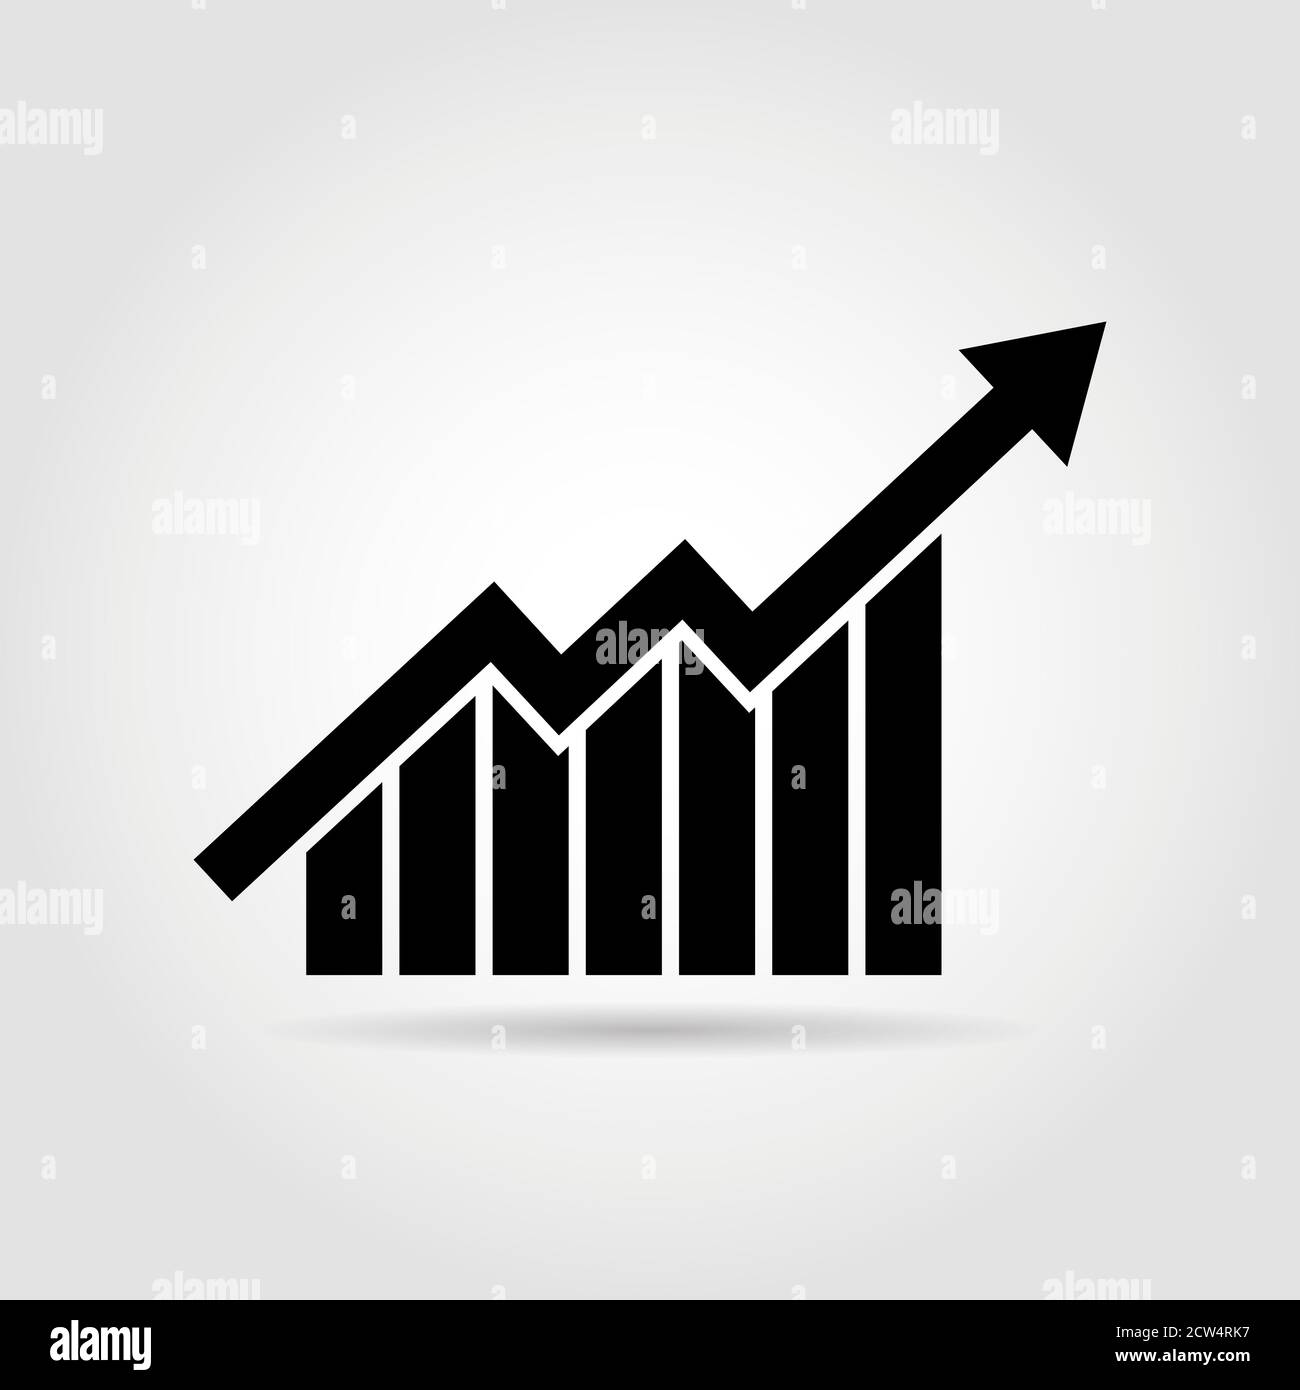 Arrow with blocks for illustration of phased, progress, increase in profits. Symbol for economy, success business. Growth diagram with Arrow going up Stock Photo